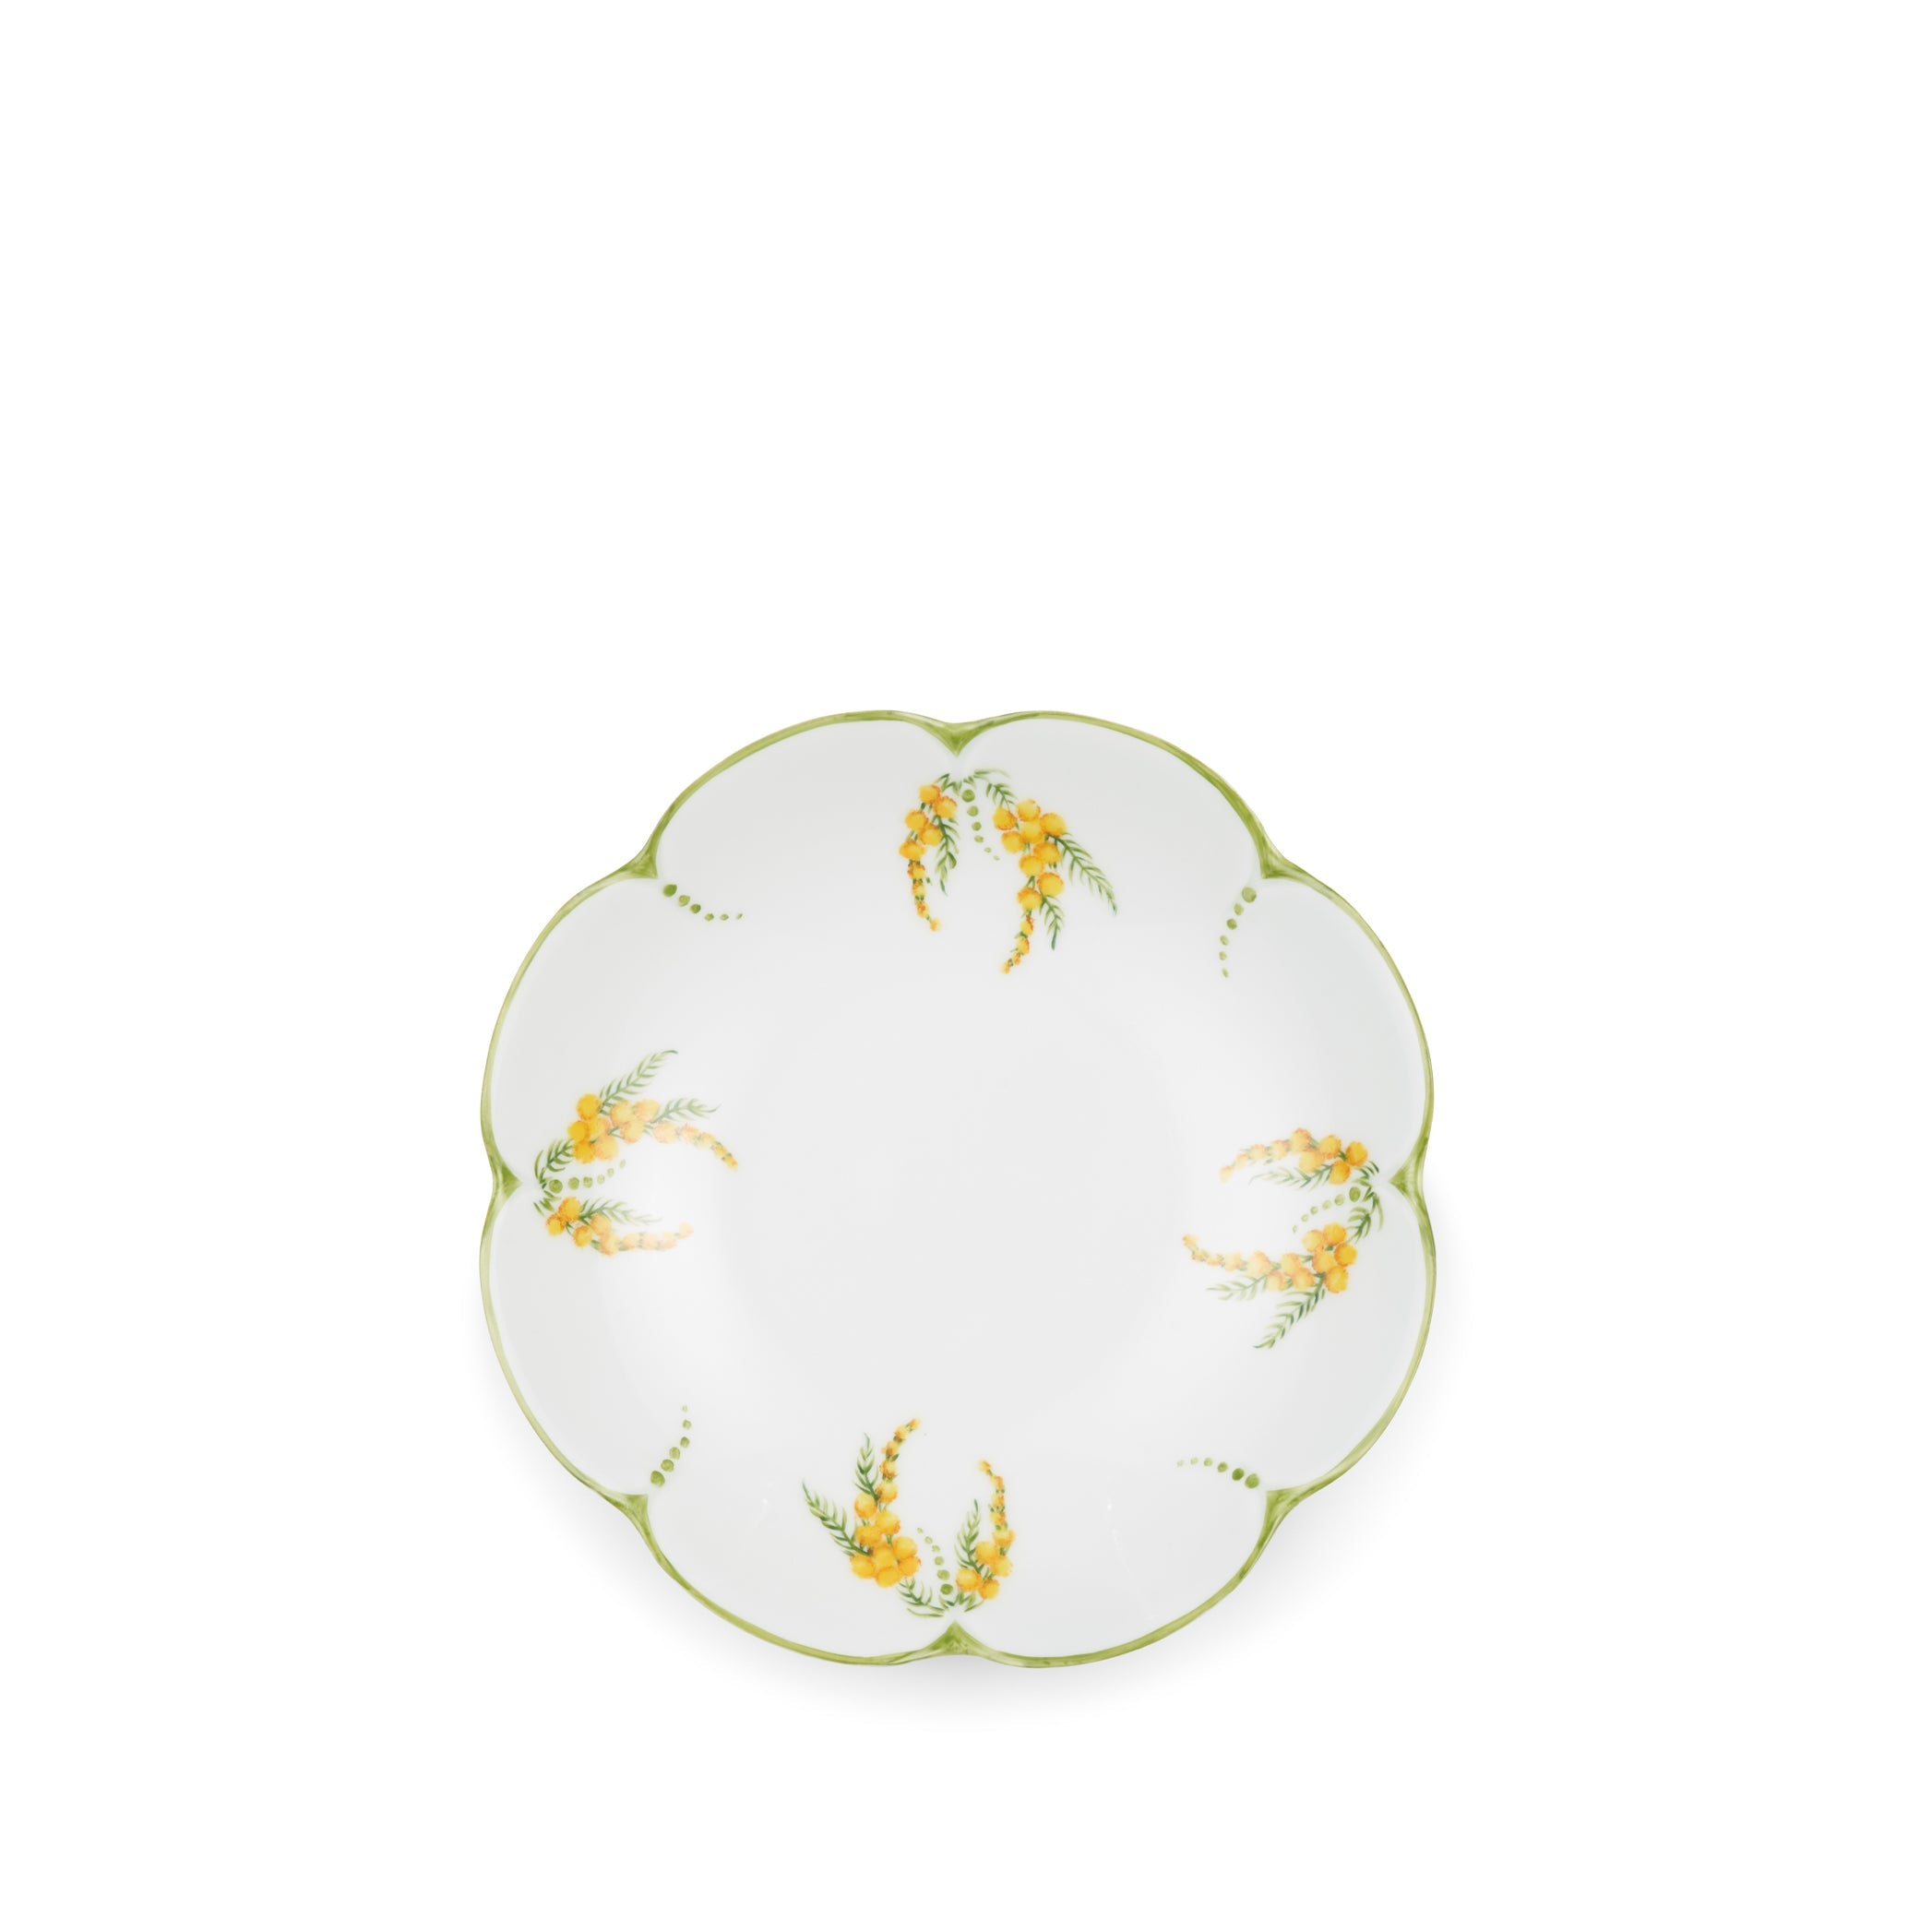 Mimosa Scalloped Hand-painted Porcelain Soup Plate, 21cm